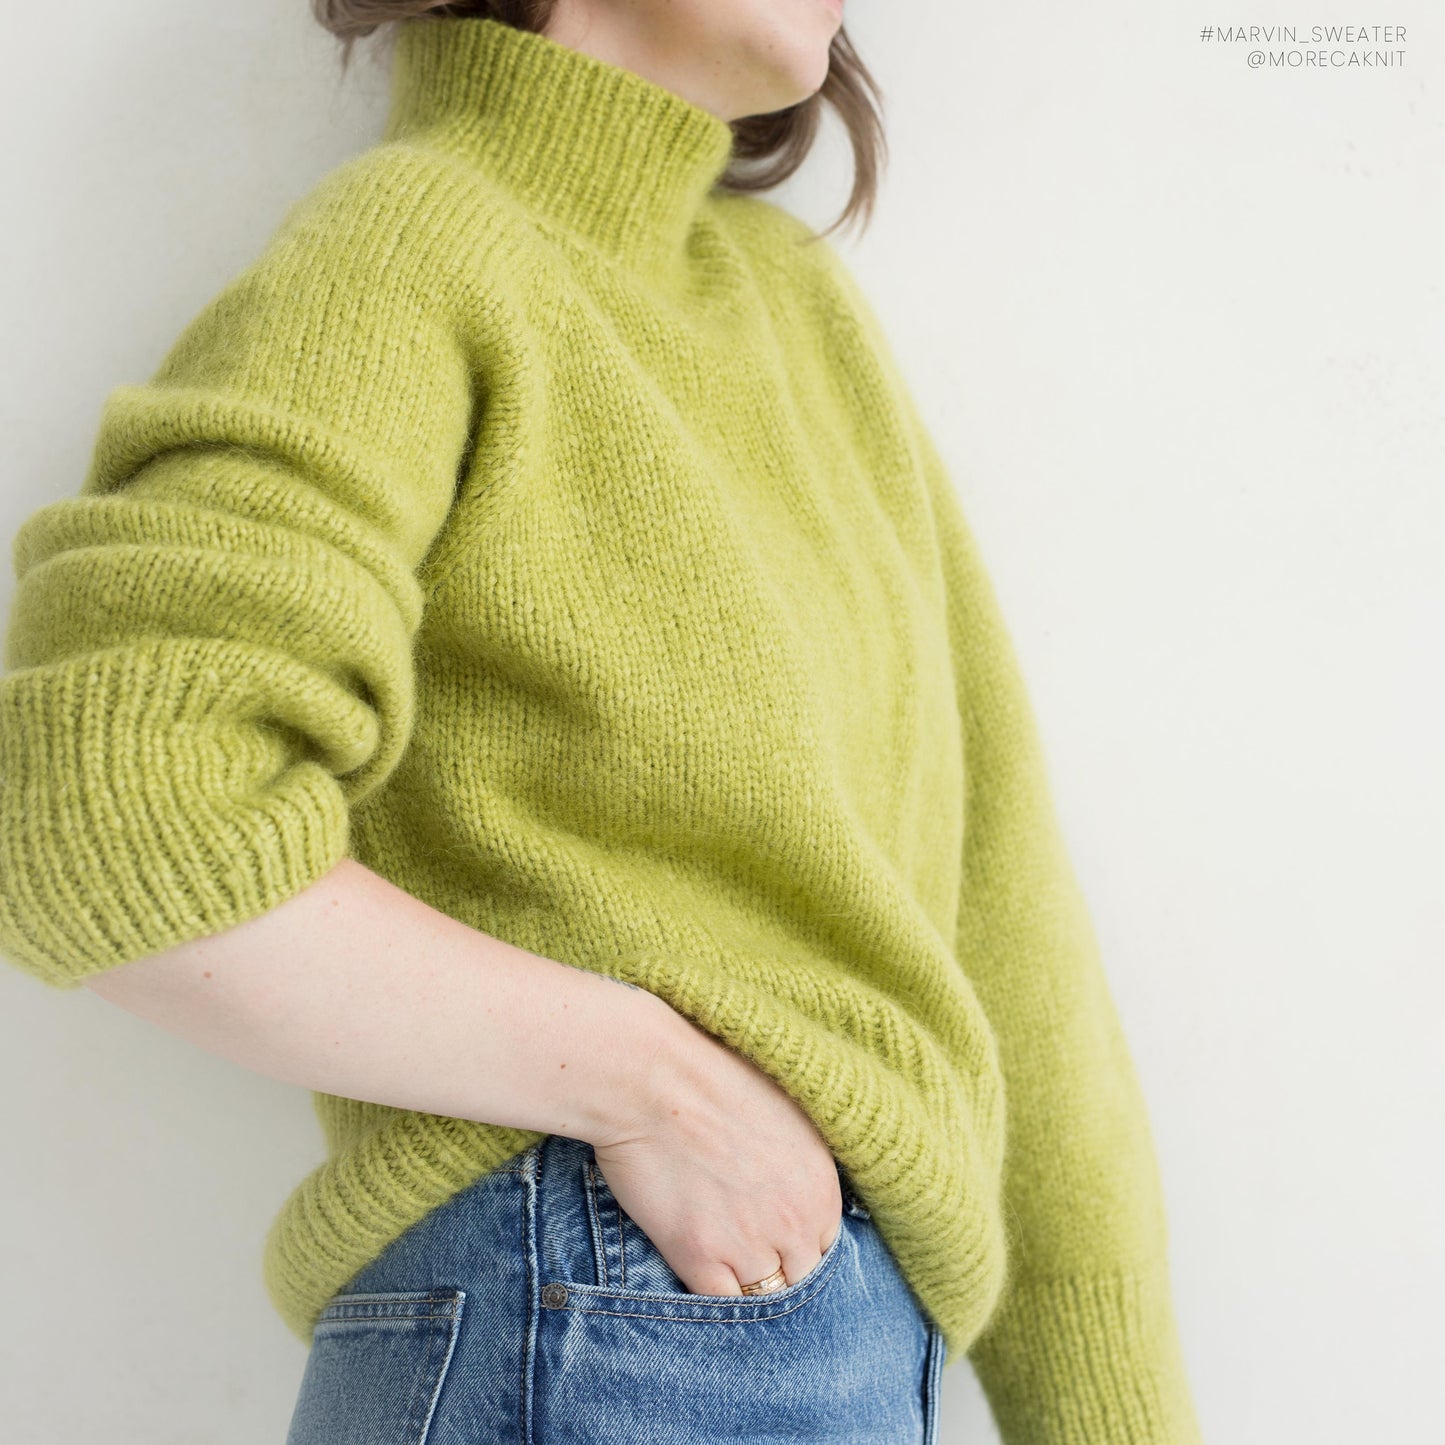 Marvin Sweater knitting pattern by MorecaKnit, a warm oversized sweater with long cuffs